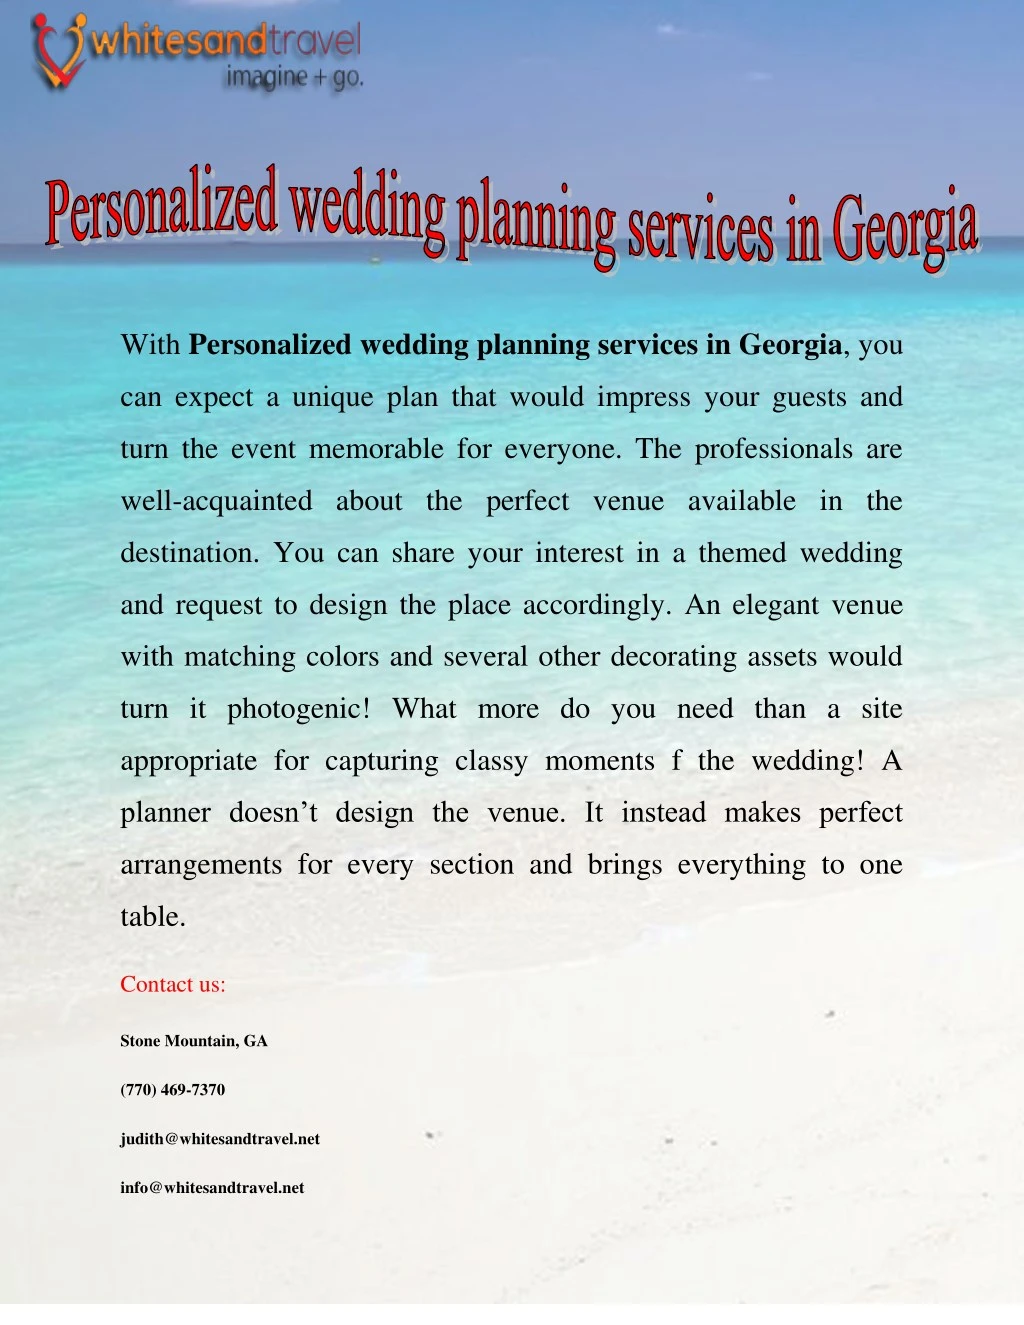 with personalized wedding planning services